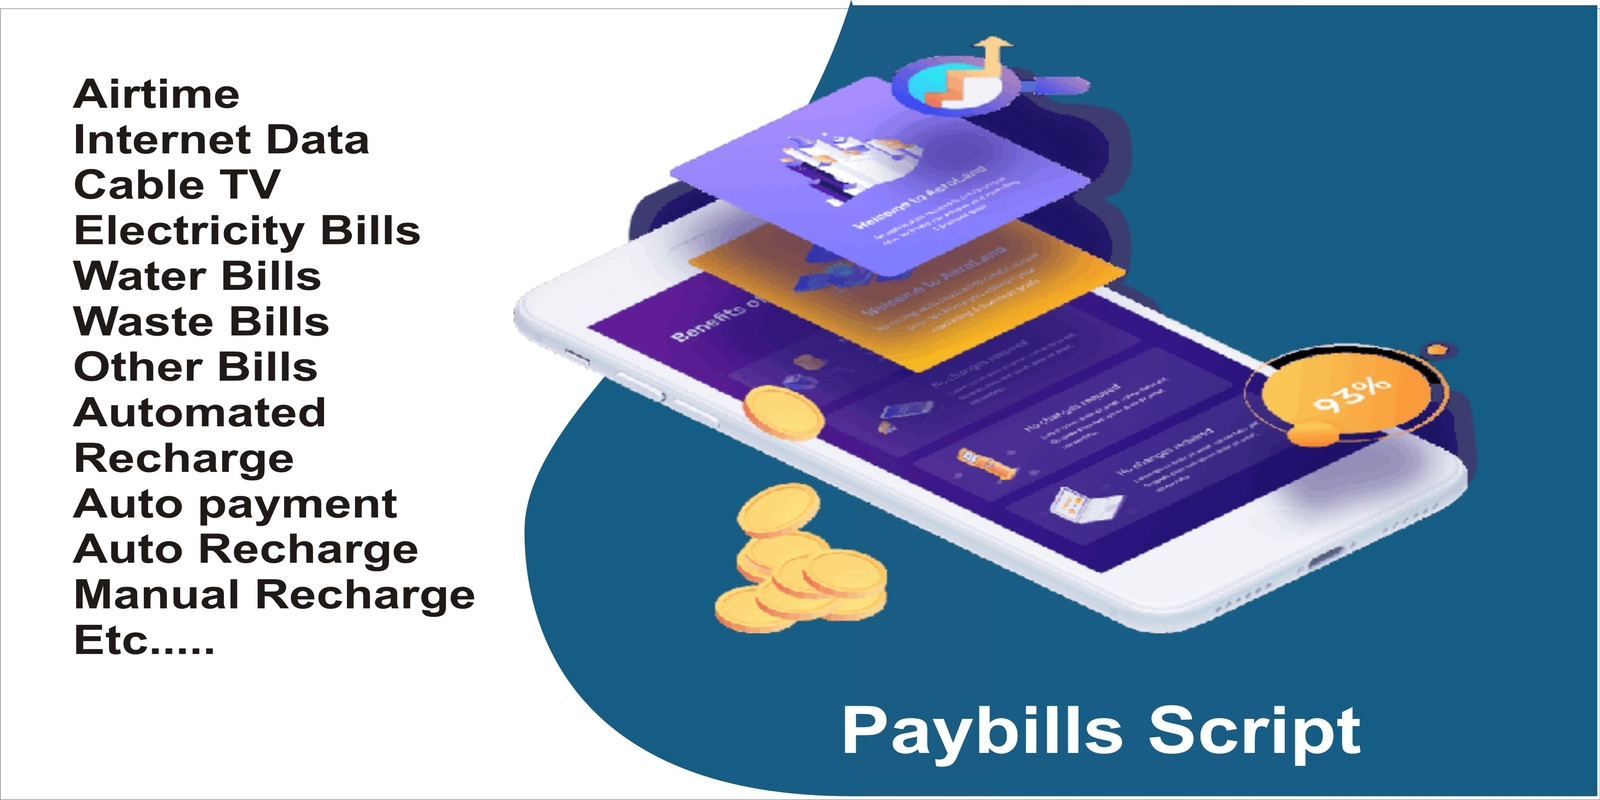 Paybills - Mobile Recharge And Bill Payment System